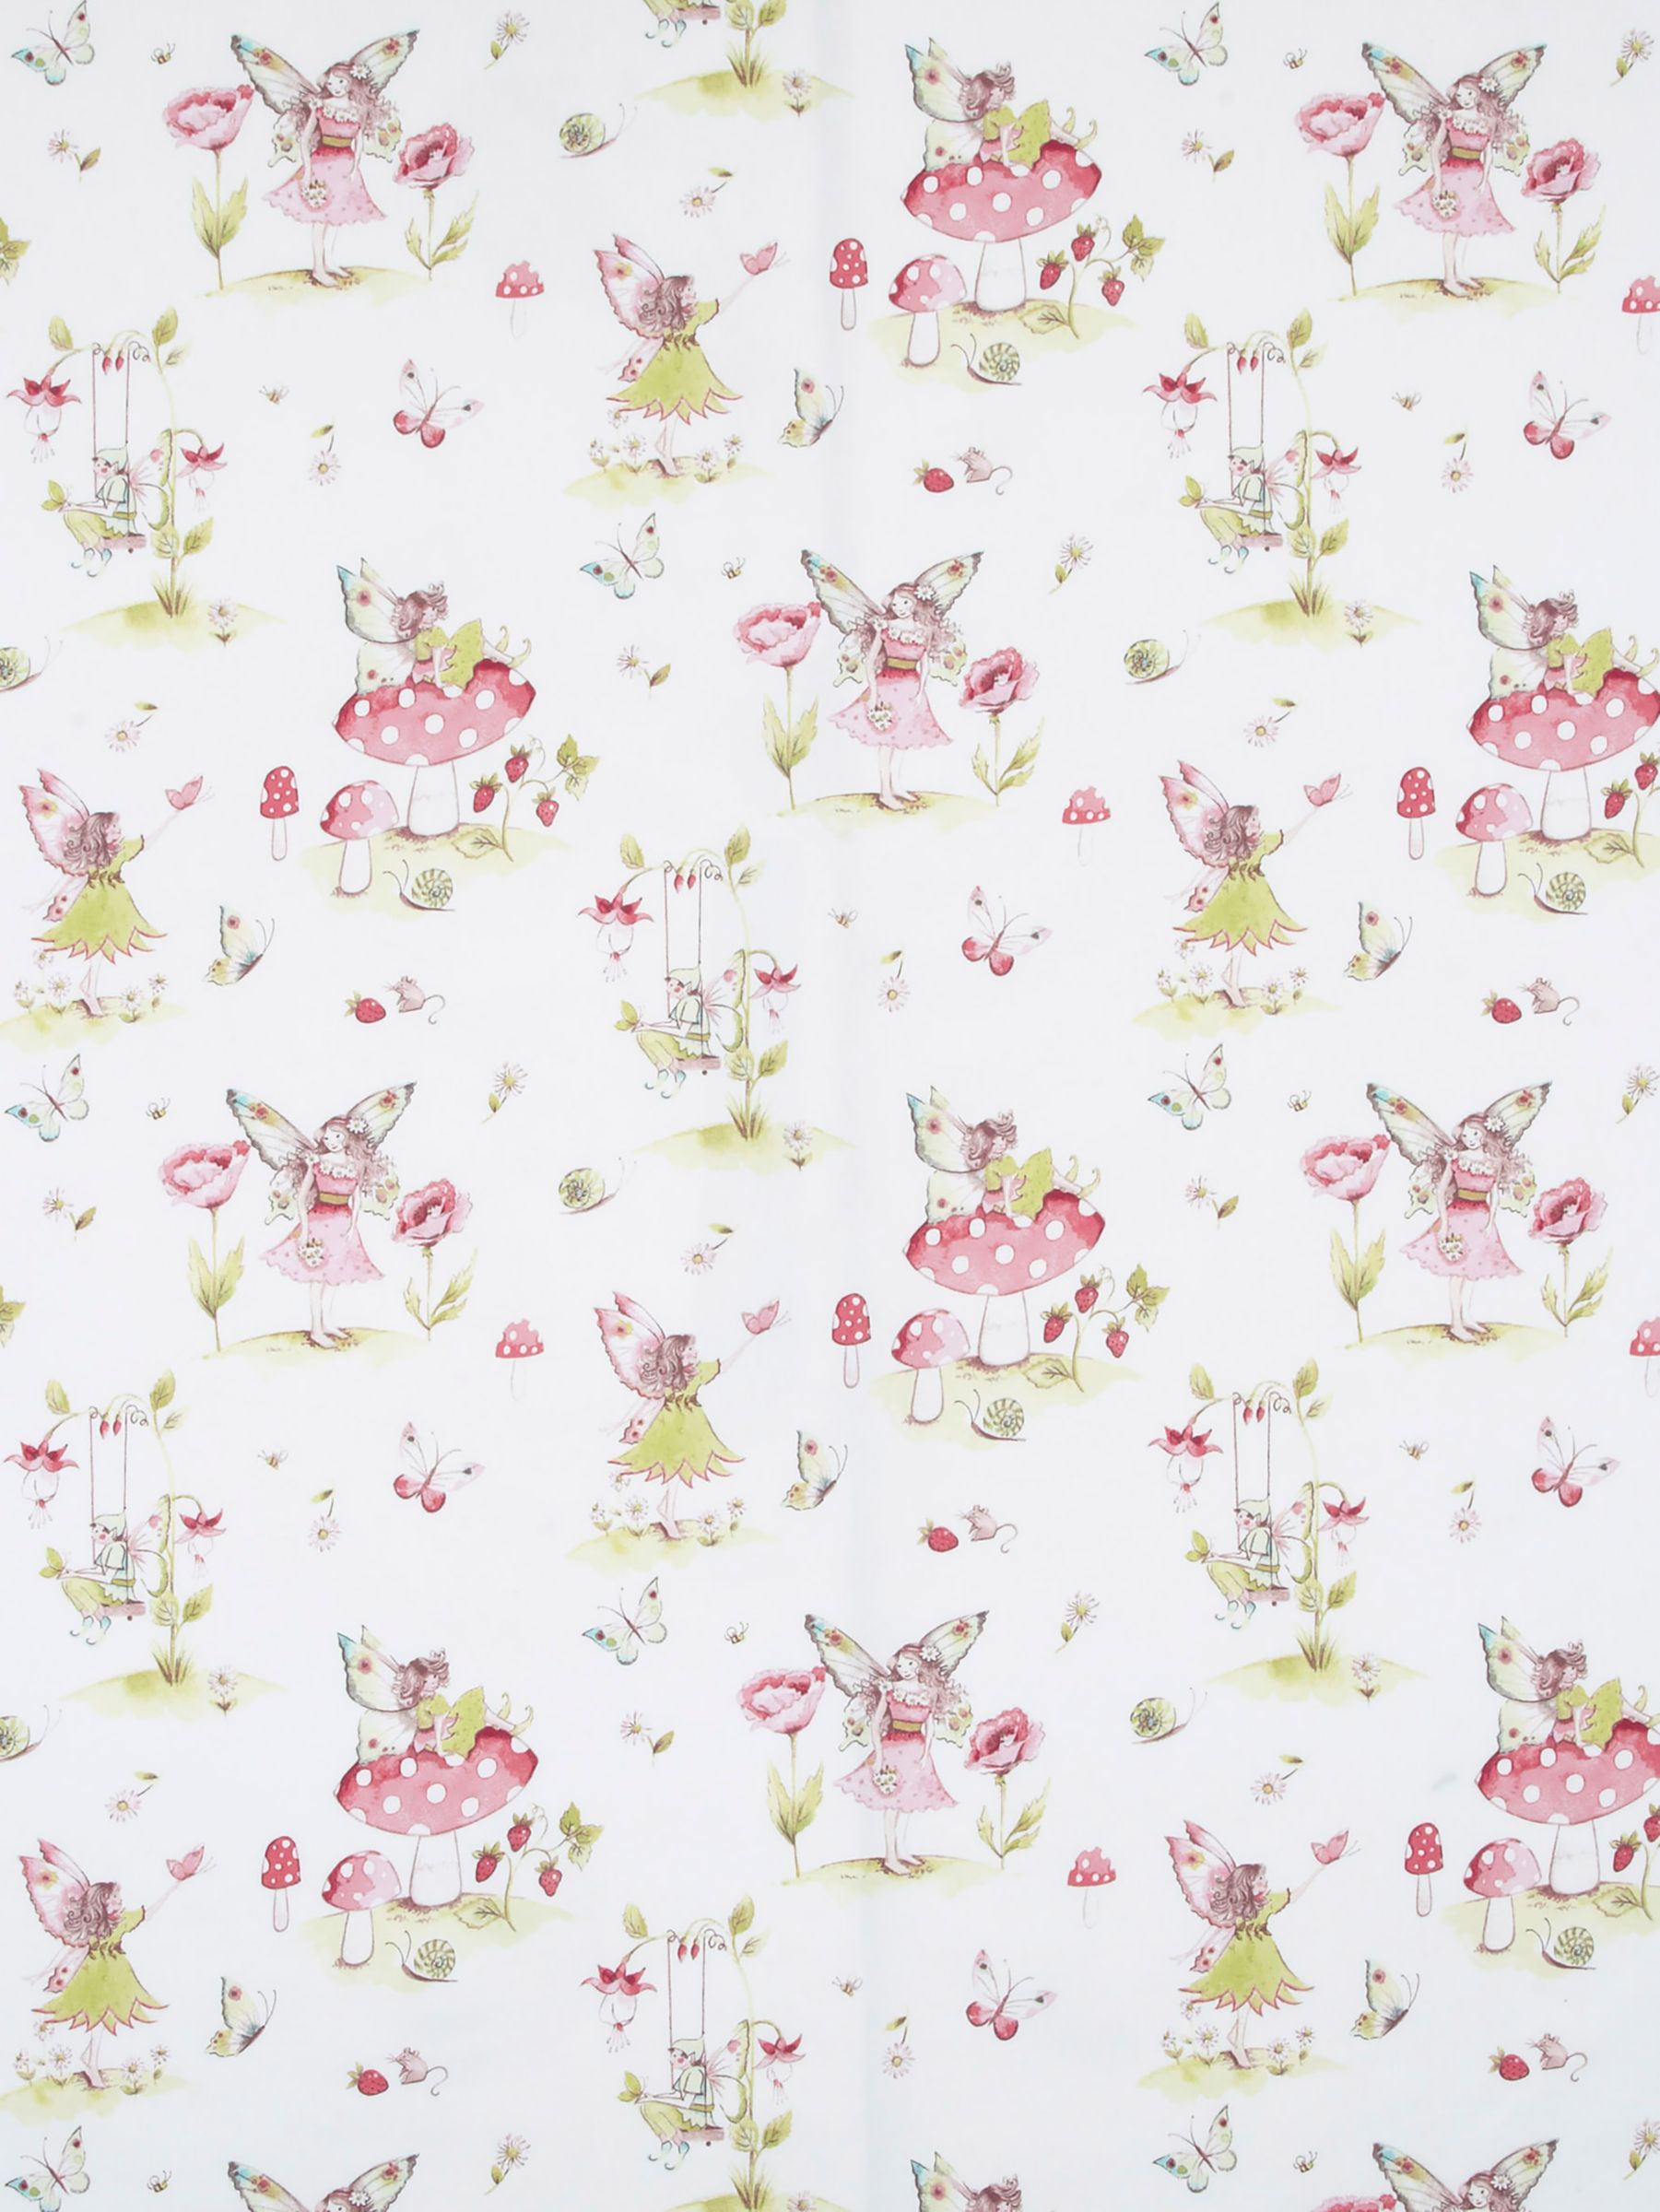 John Lewis Fairytale Made to Measure Curtains or Roman Bind, Pink